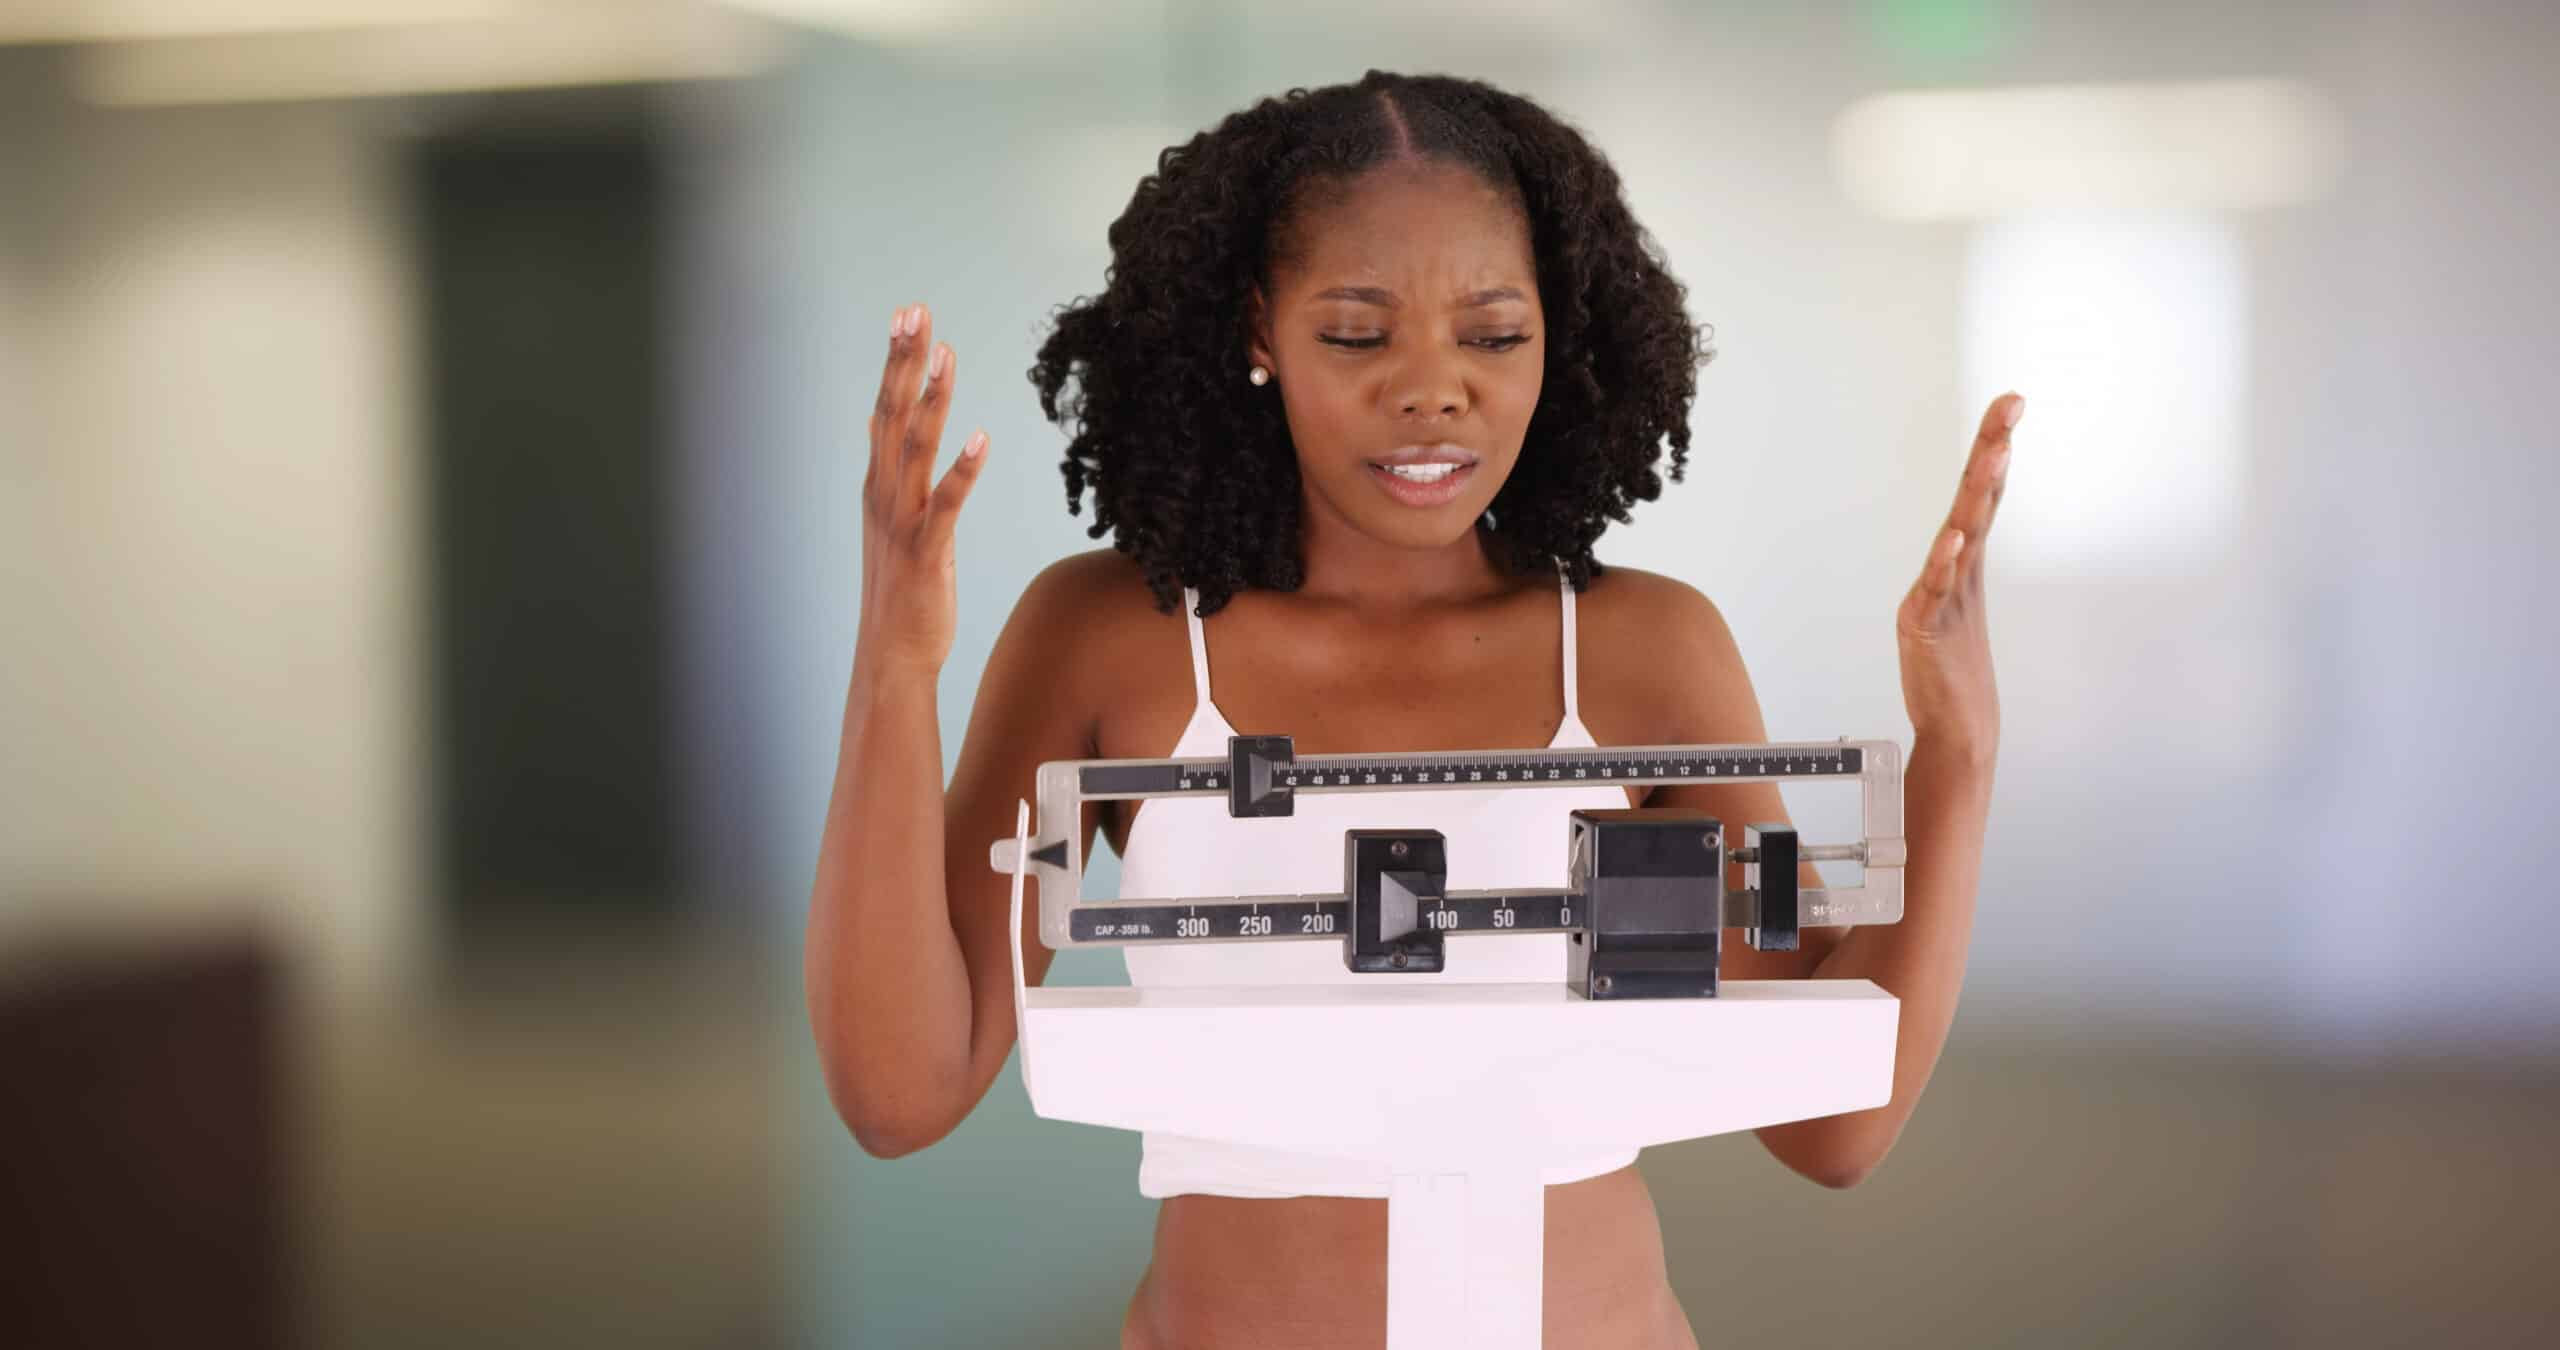 Tirzepatide enhances weight loss with sustained treatment but discontinuation leads to weight regain